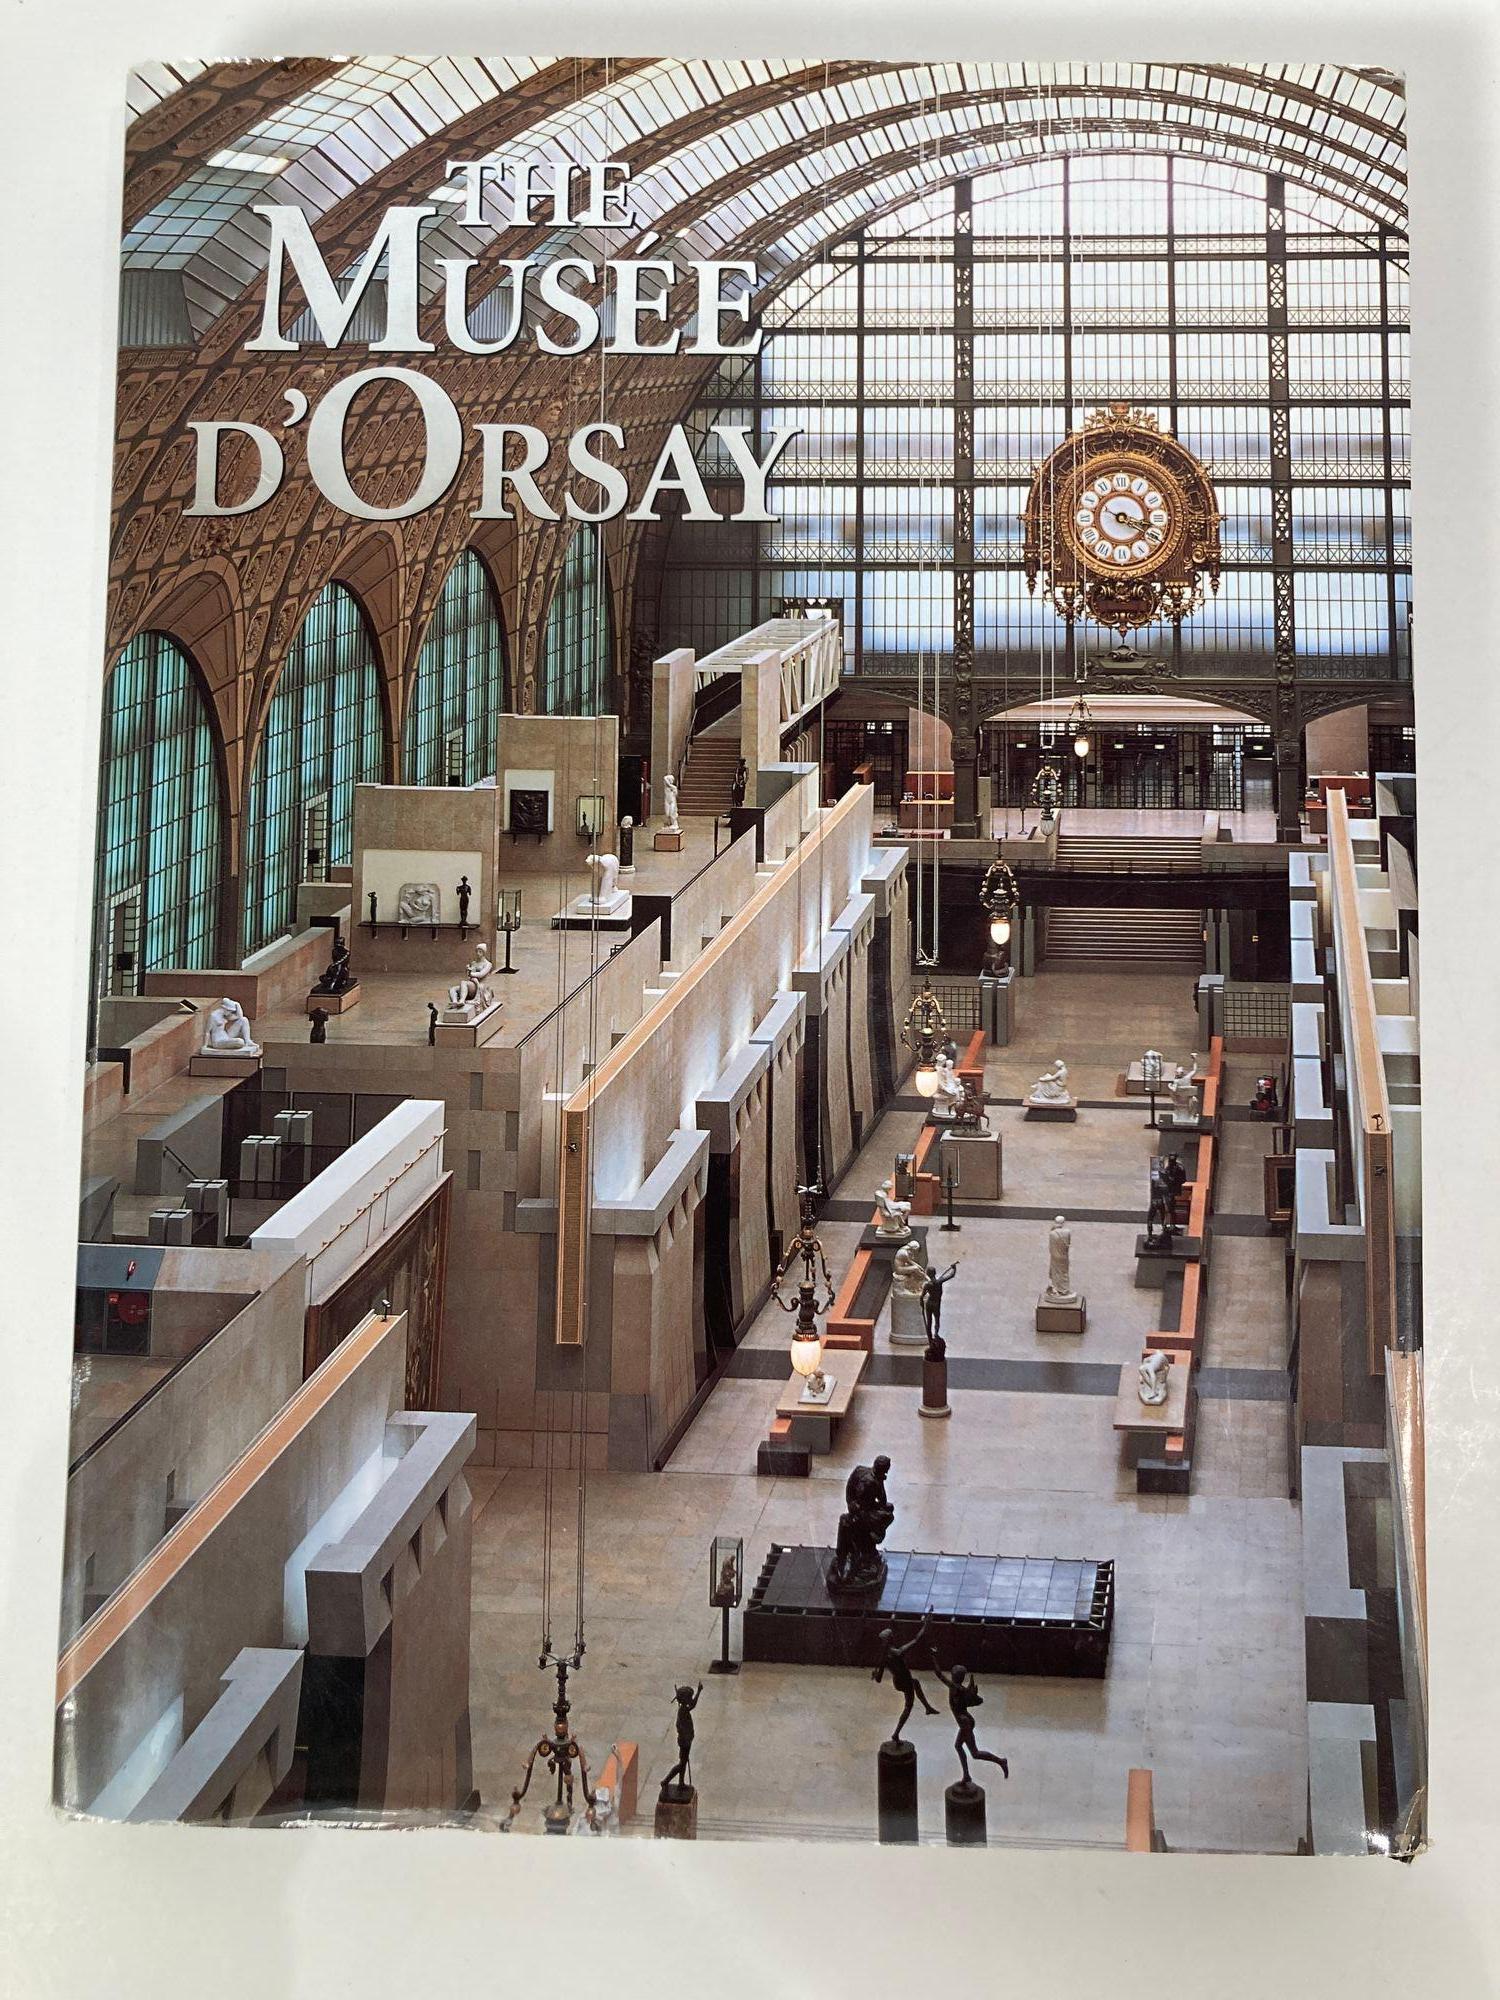 Musee D'Orsay Hardcover Book– November 30, 2000 by Alexandra Bonfante-Warren.
Large format hardcover coffee table book.

* Publisher ‏ : ‎ Universe; First Printing edition (November 30, 2000)
* Language ‏ : ‎ English
* Hardcover ‏ : ‎ 320 pages
*